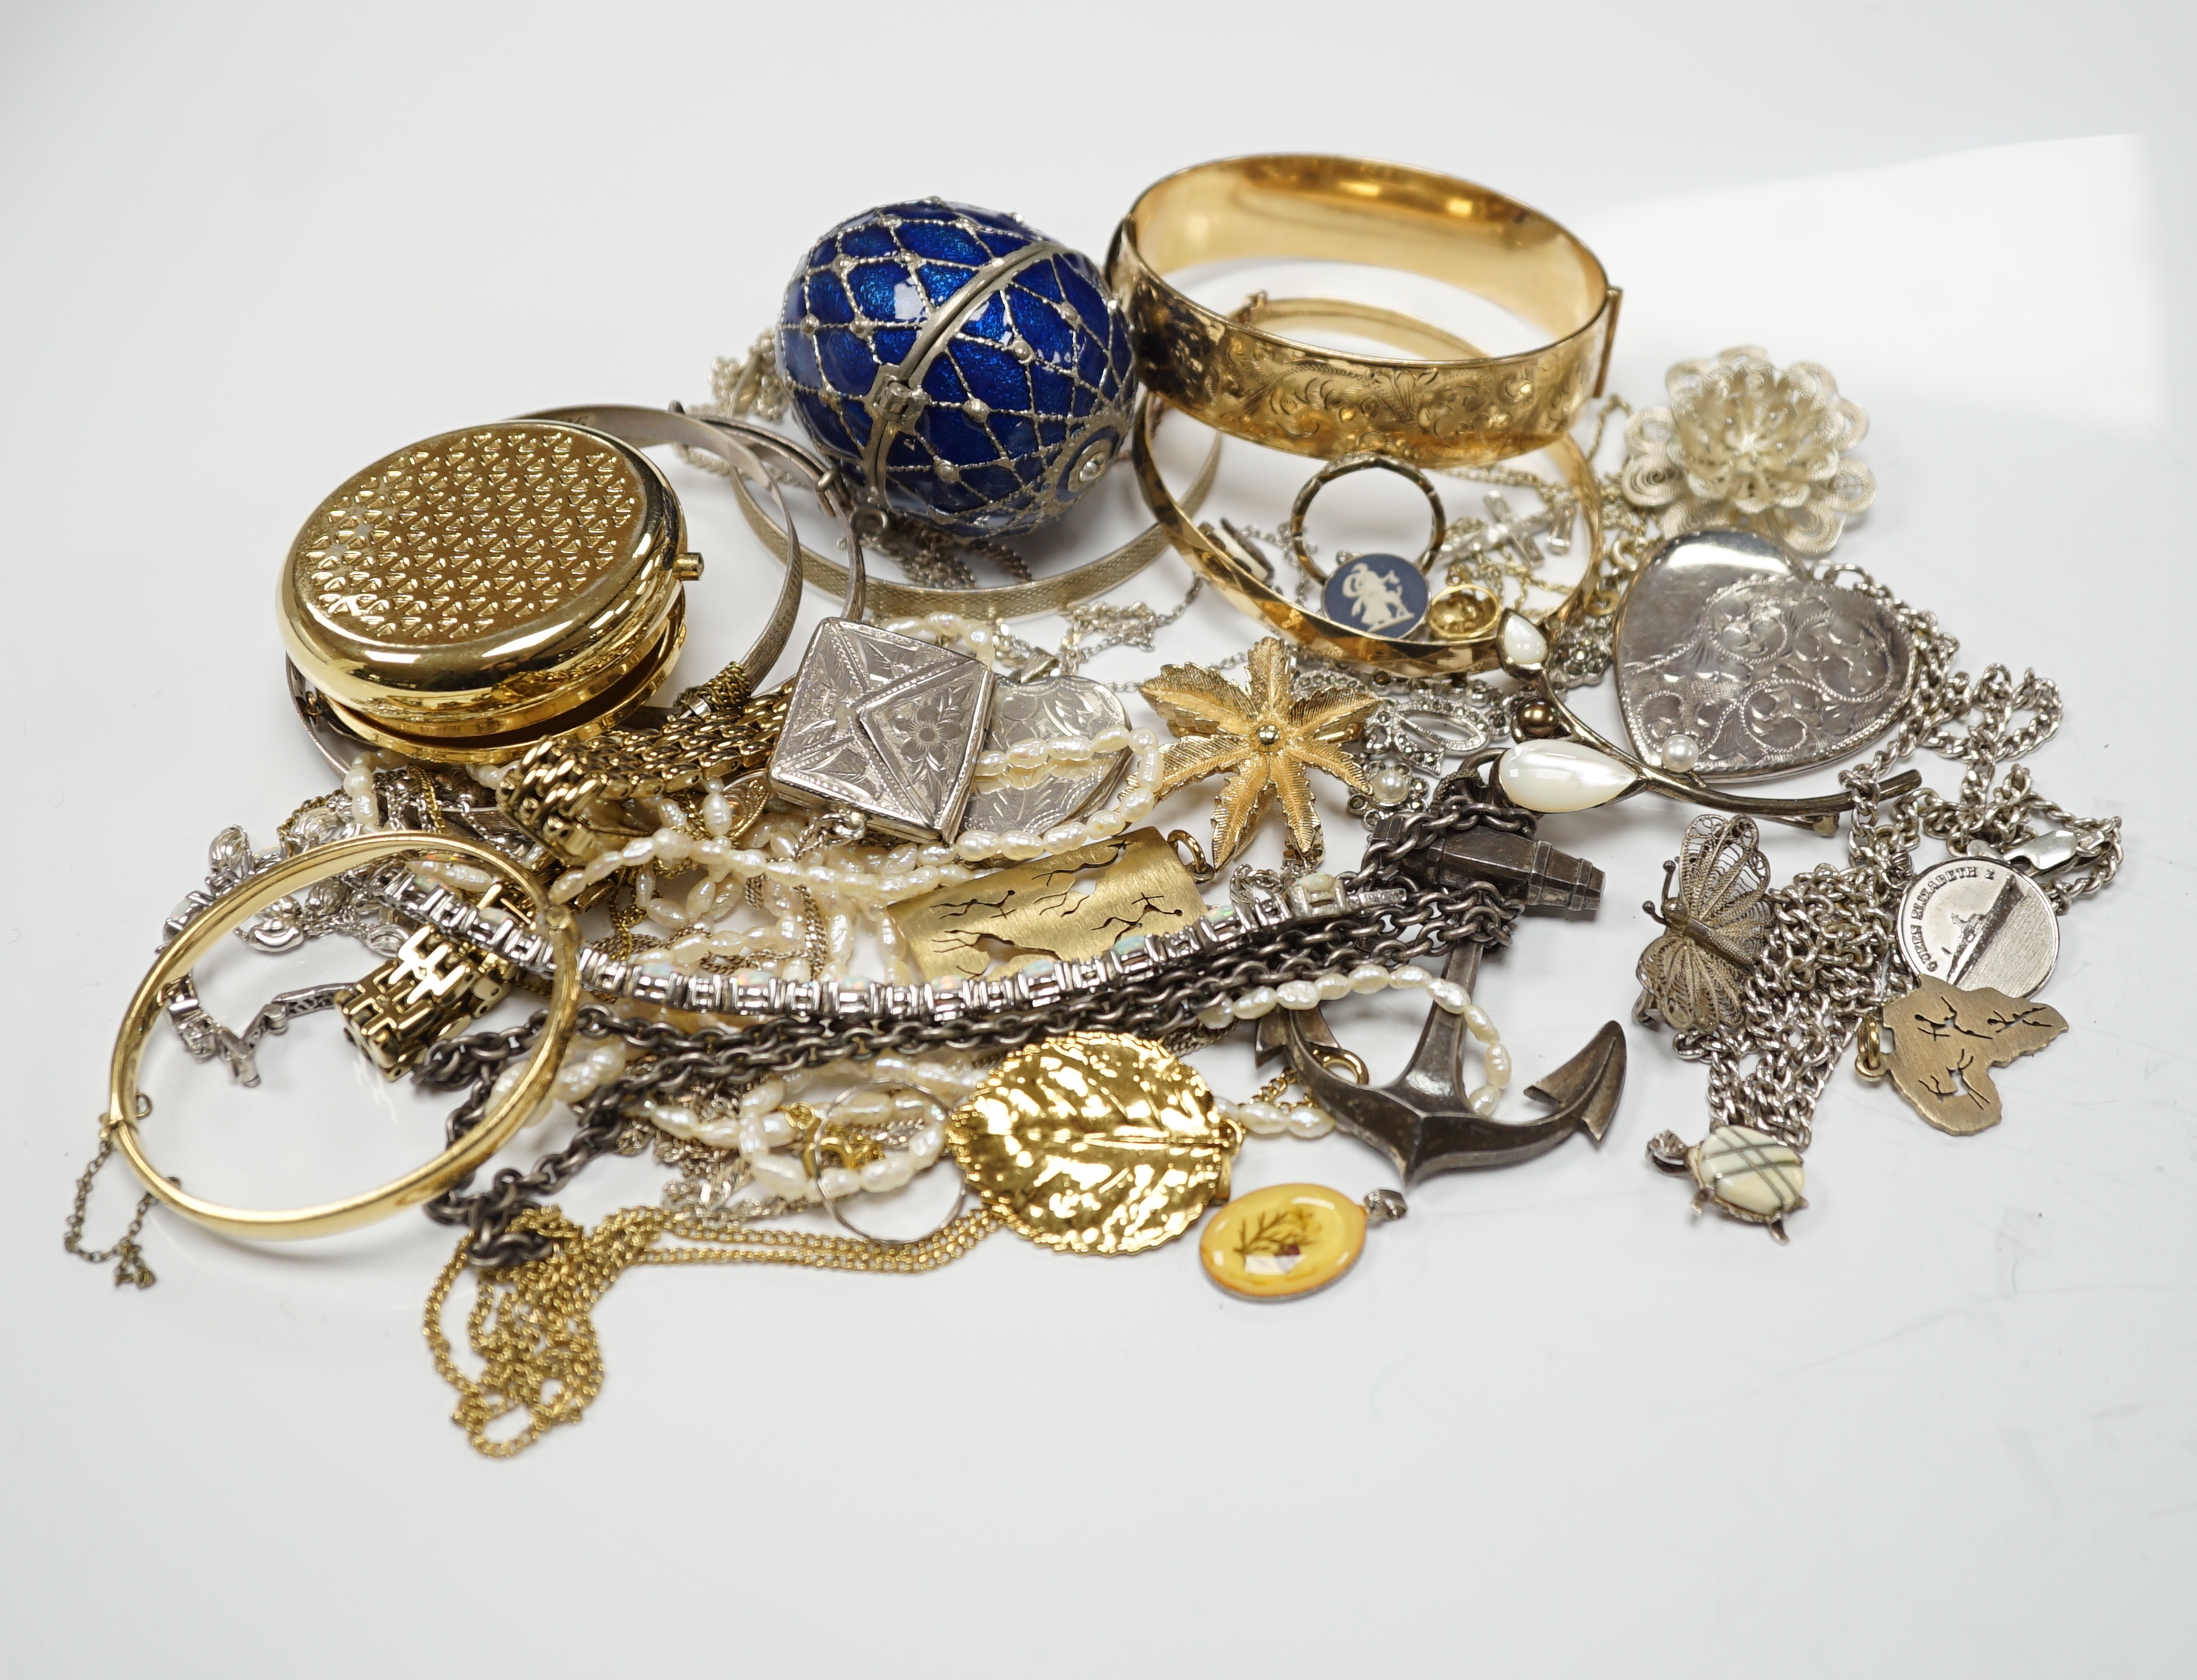 A quantity of assorted costume and silver jewellery including pendants, locket, bracelets, bangles, chains etc.